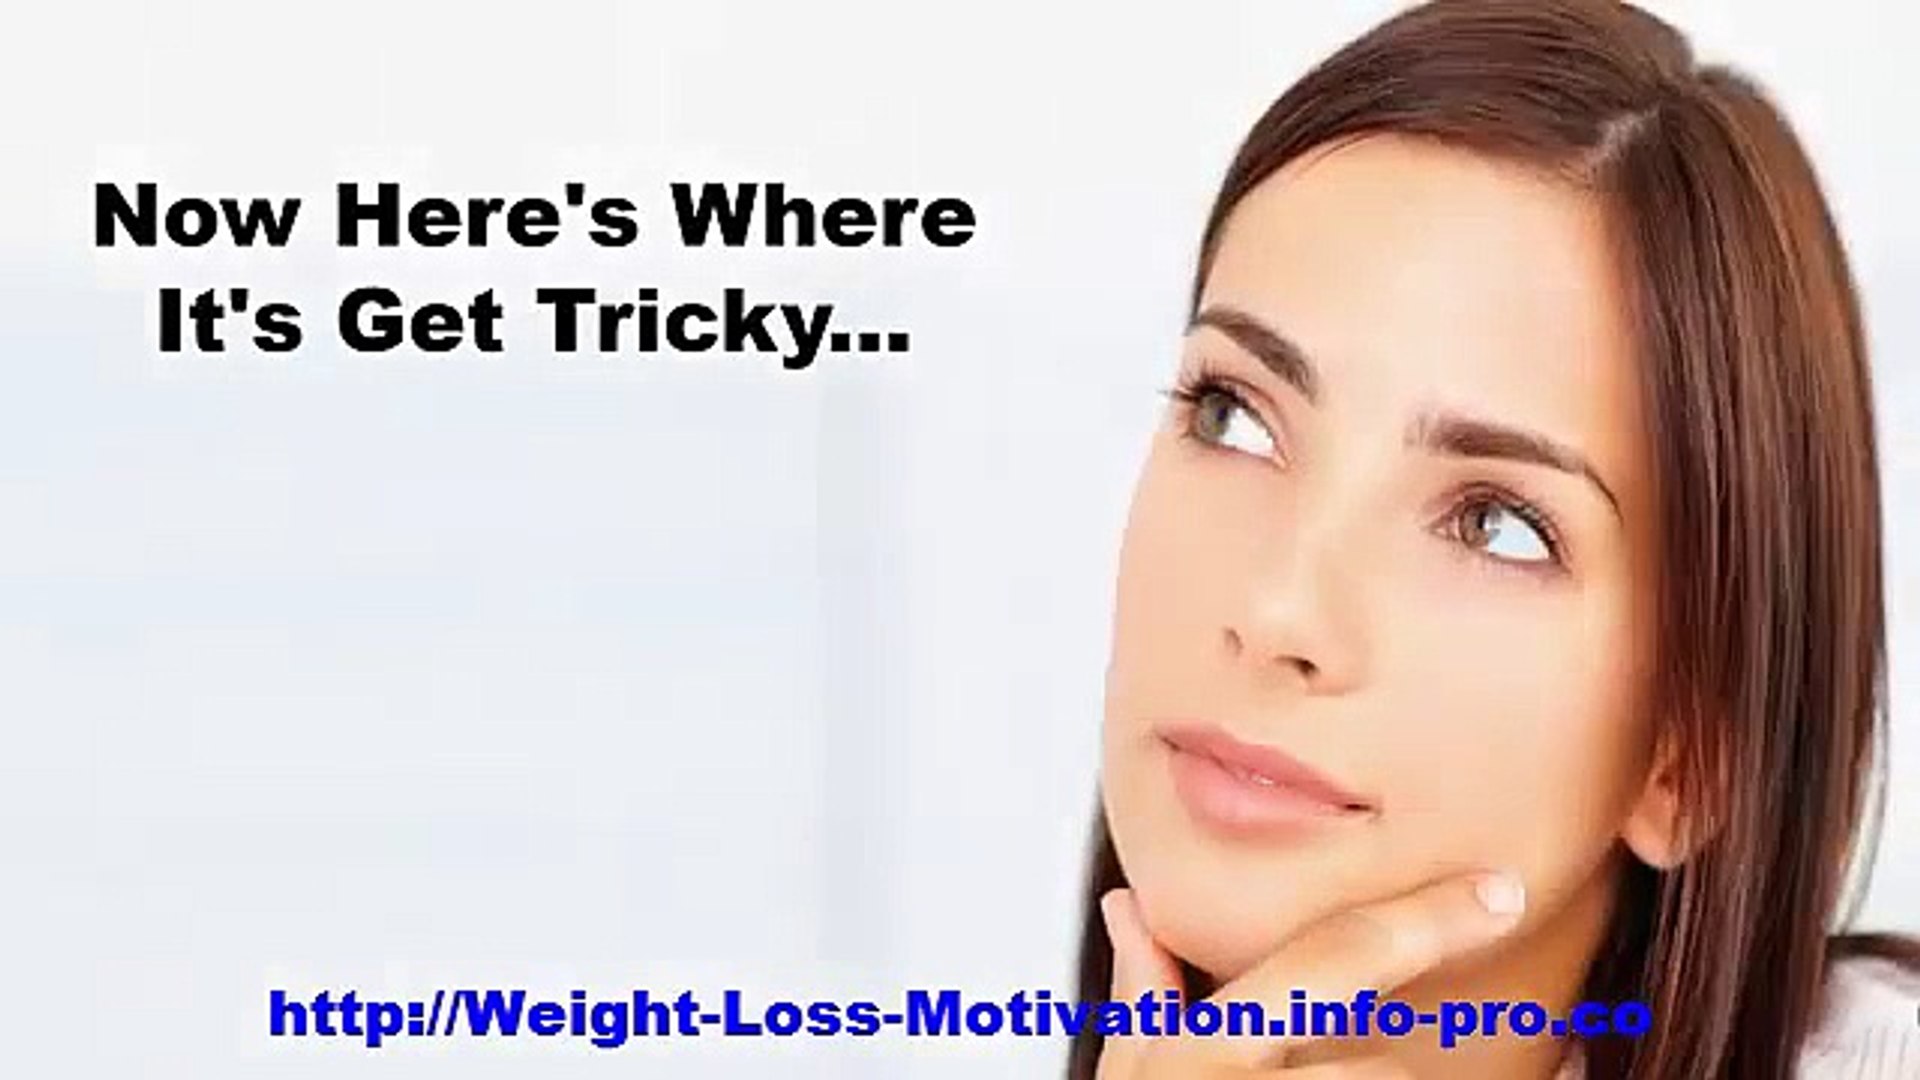 How To Lose Weight Naturally, Unexplained Weight Loss, How To Lose Weight Naturally At Home Remedy